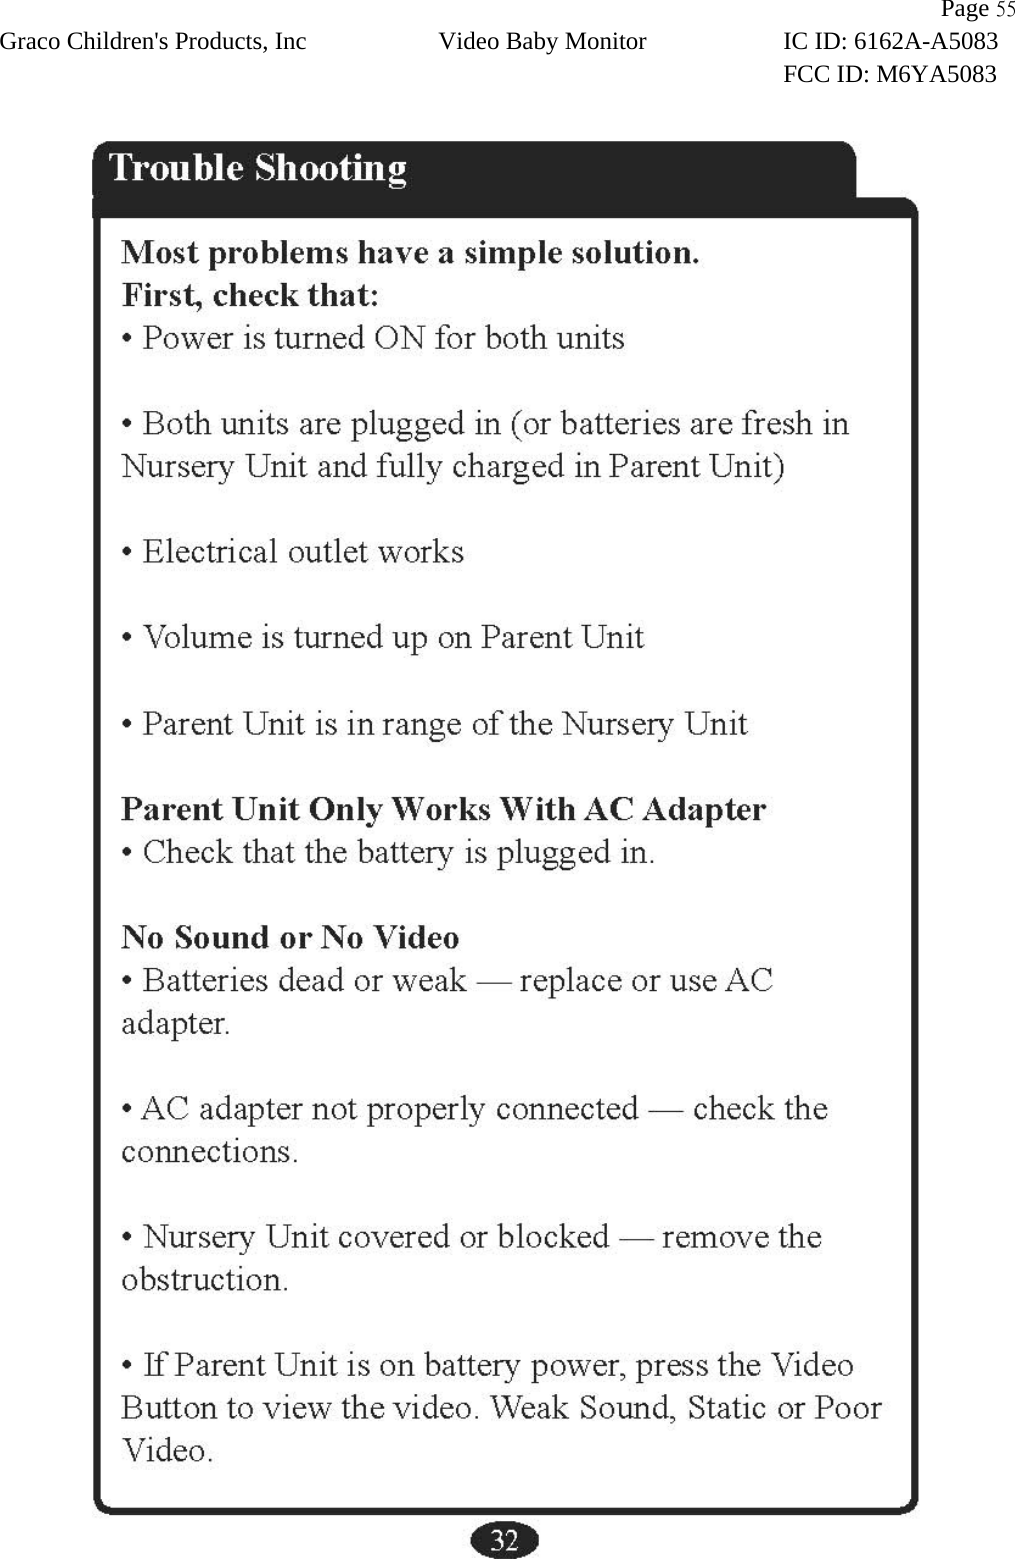                Page 55 Graco Children&apos;s Products, Inc Video Baby Monitor IC ID: 6162A-A5083 FCC ID: M6YA5083    